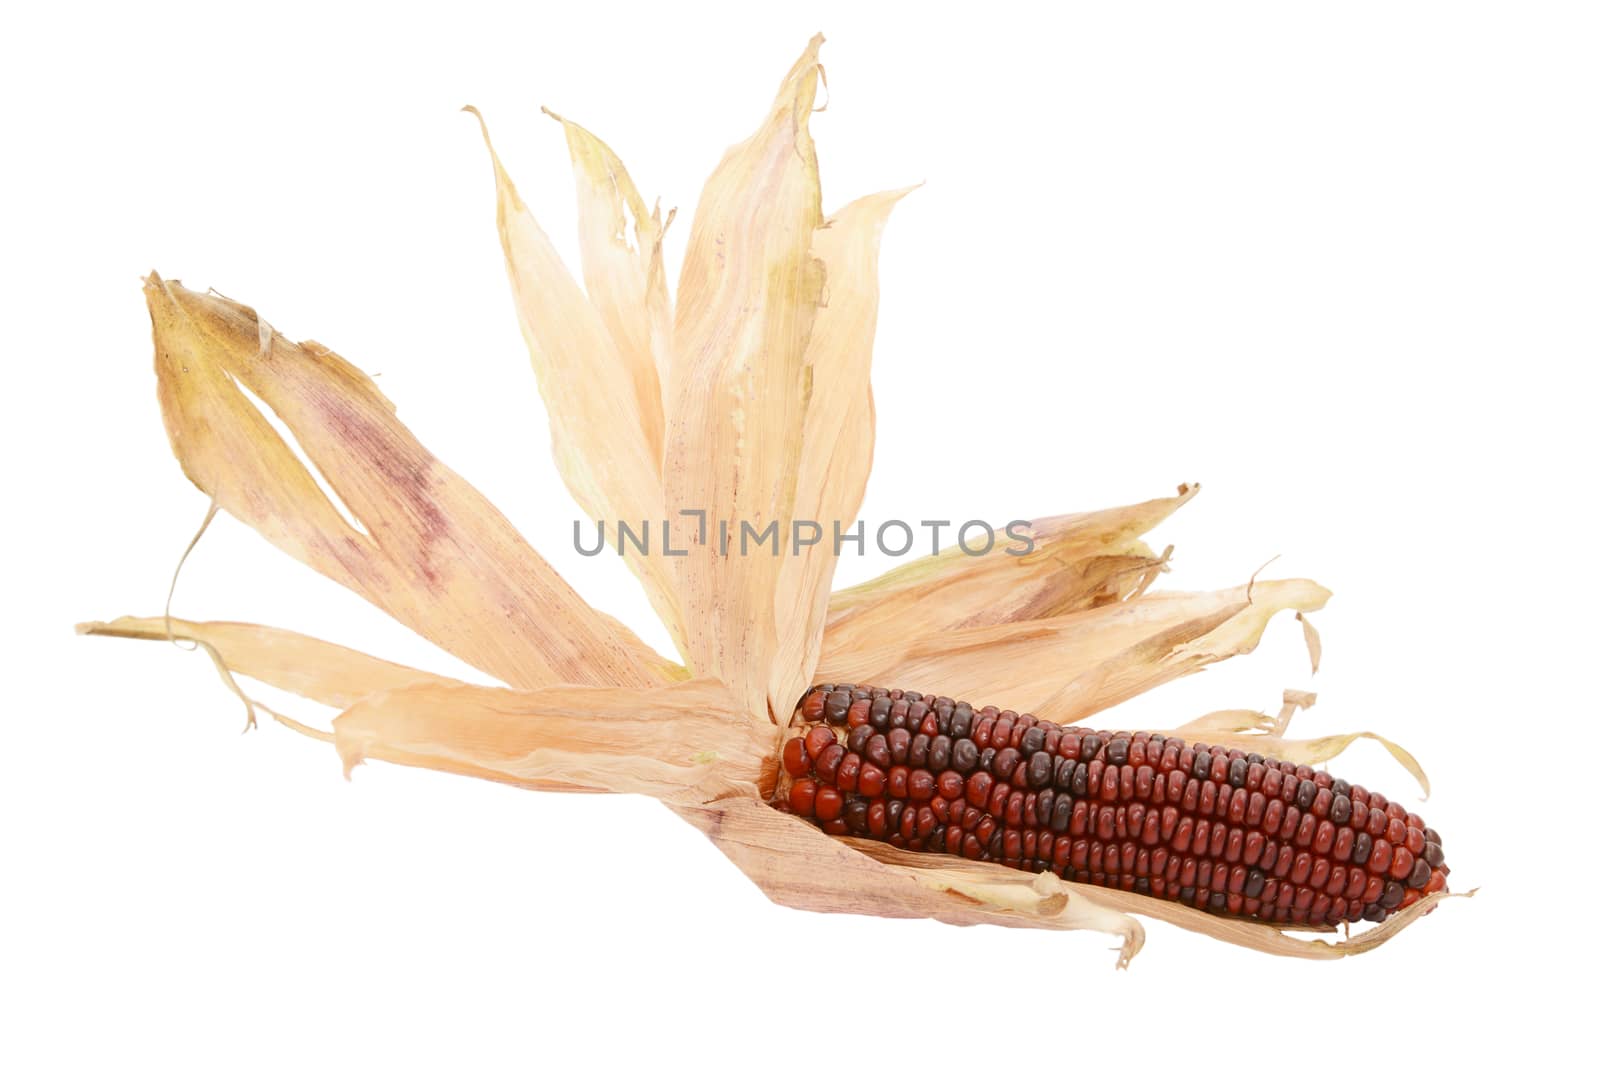 Dried papery husks fanned out around a decorative deep red Fiesta sweetcorn, on a white background